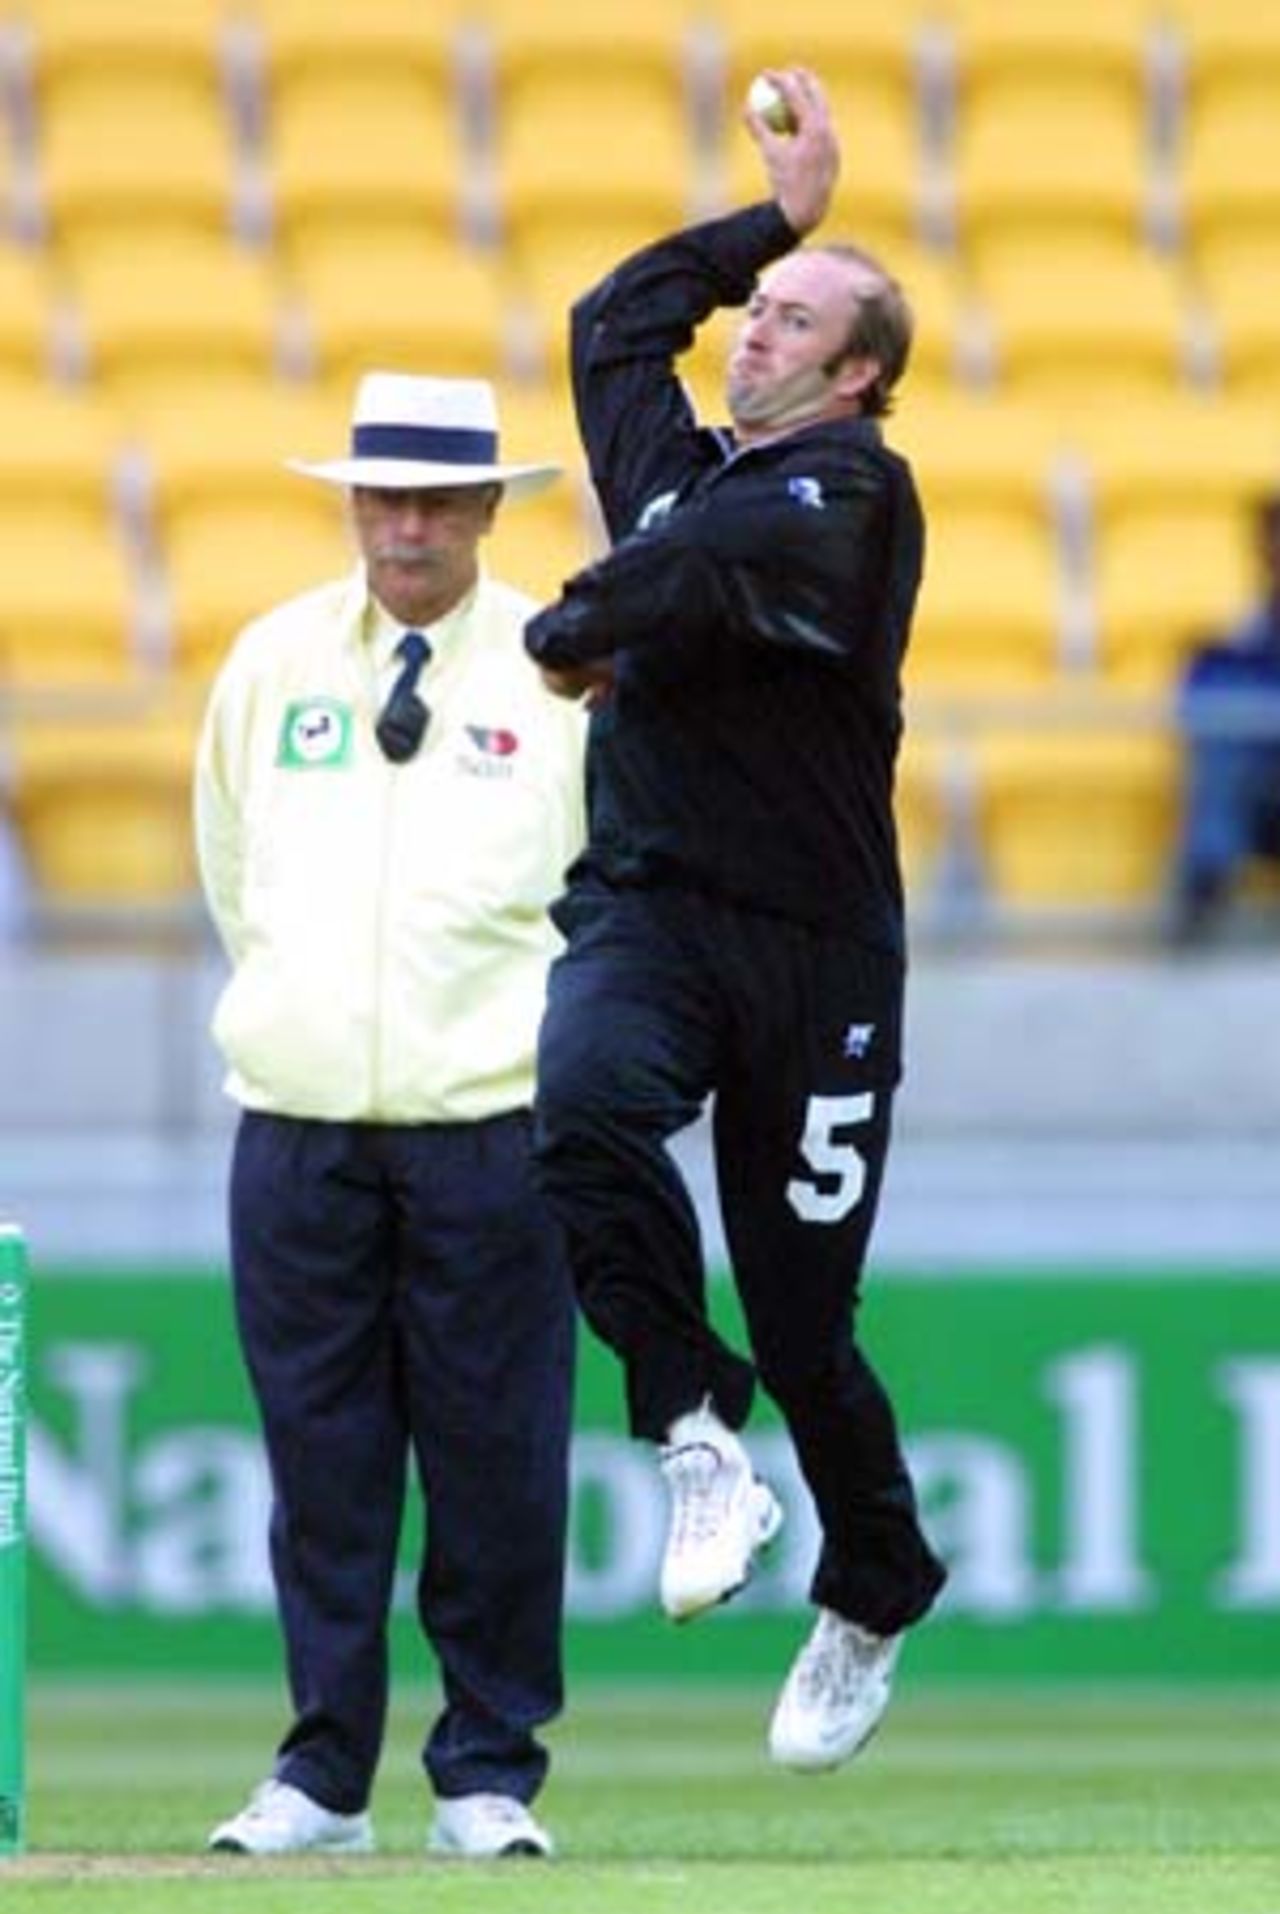 New Zealand medium pace bowler Chris Harris bowls under the watchful eye of umpire Steve Dunne during his spell of 0-38 from 10 overs. 2nd One-Day International: New Zealand v Sri Lanka at WestpacTrust Stadium, Wellington, 3 February 2001.